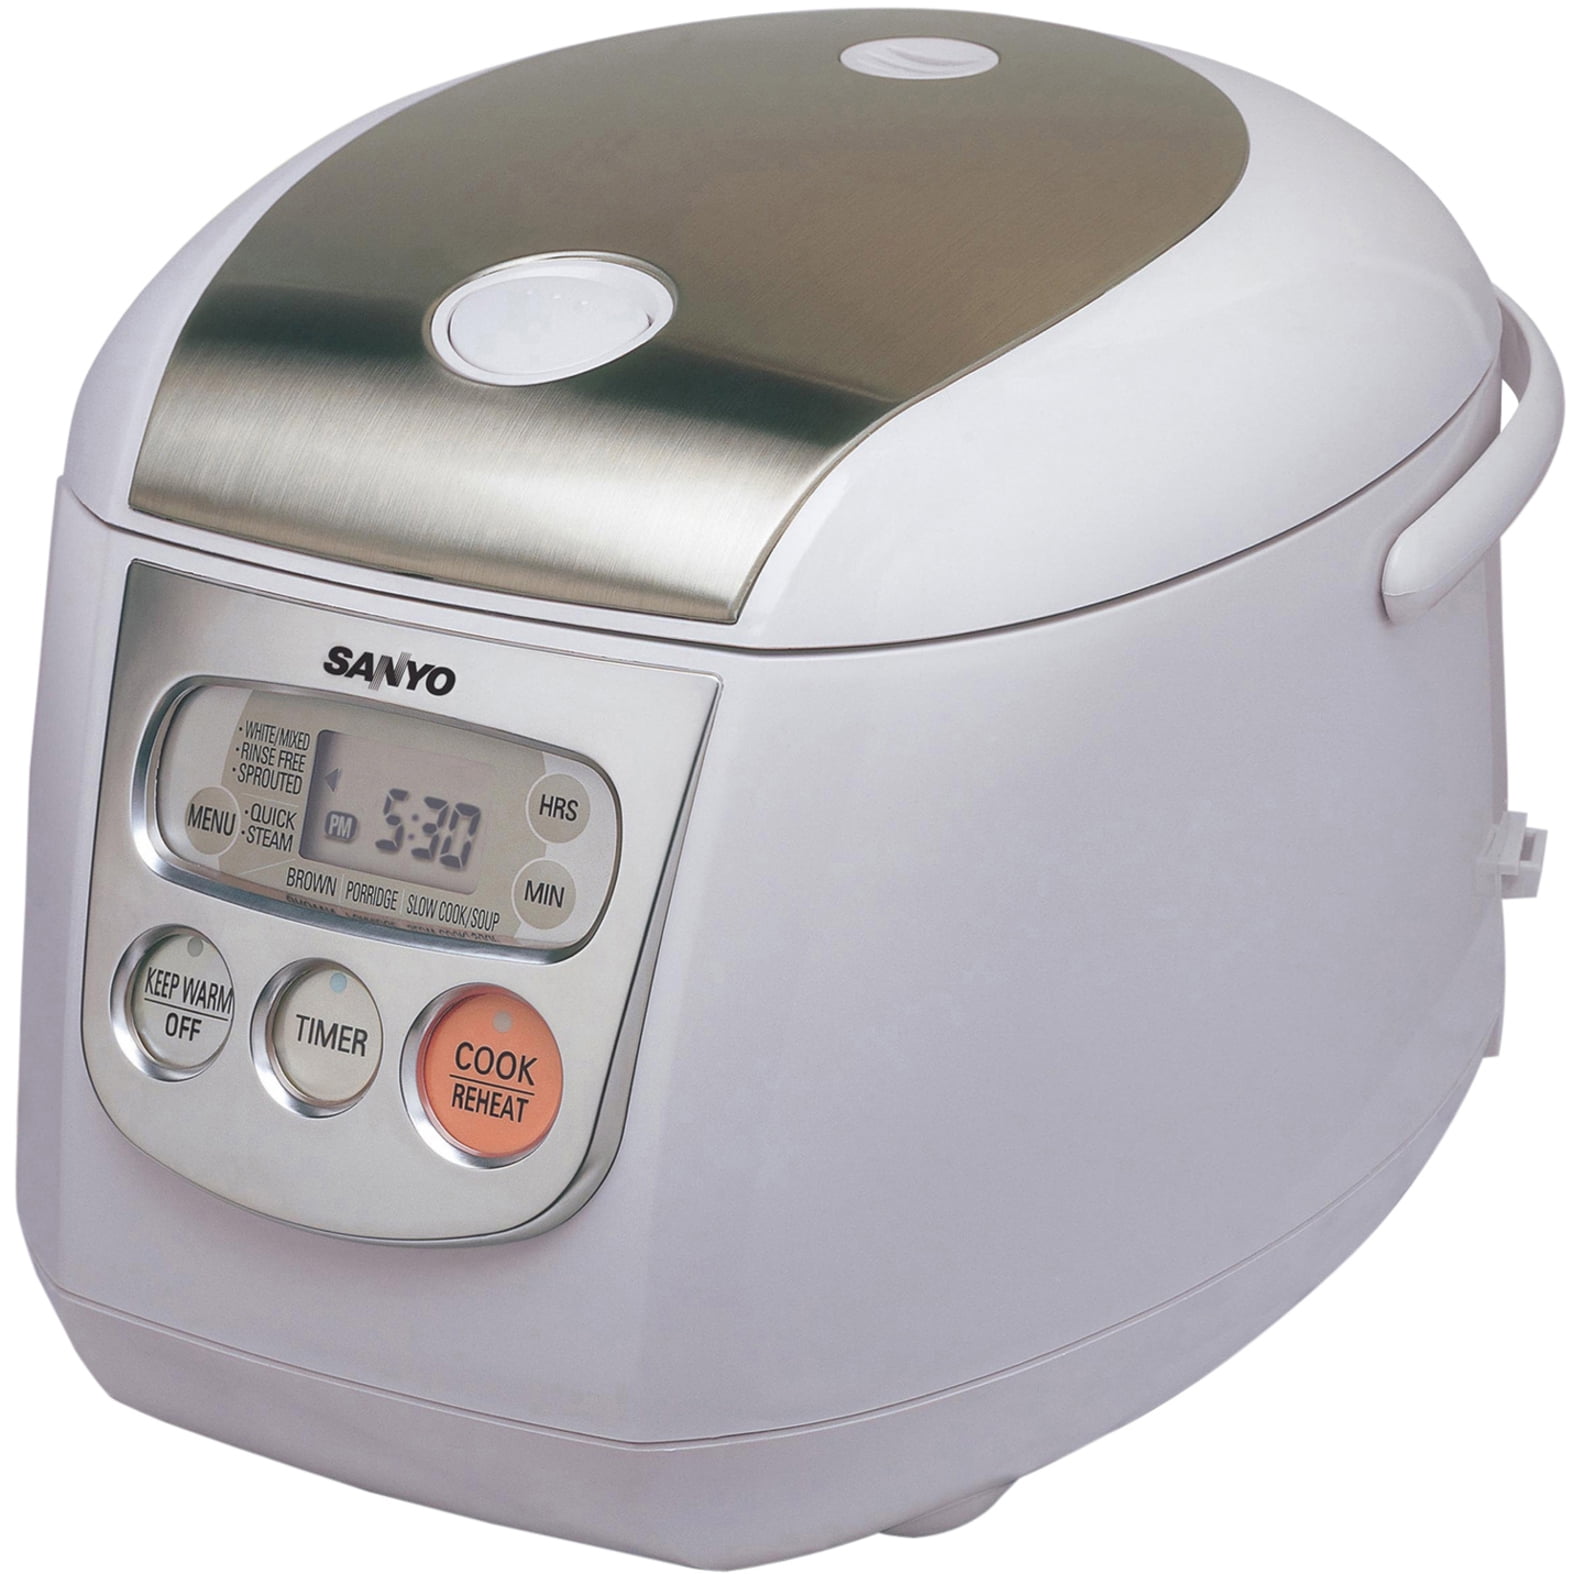 Sanyo ECJ-N55W 5.5-Cup Rice Cooker & Steamer w/ Variable Temperature Control